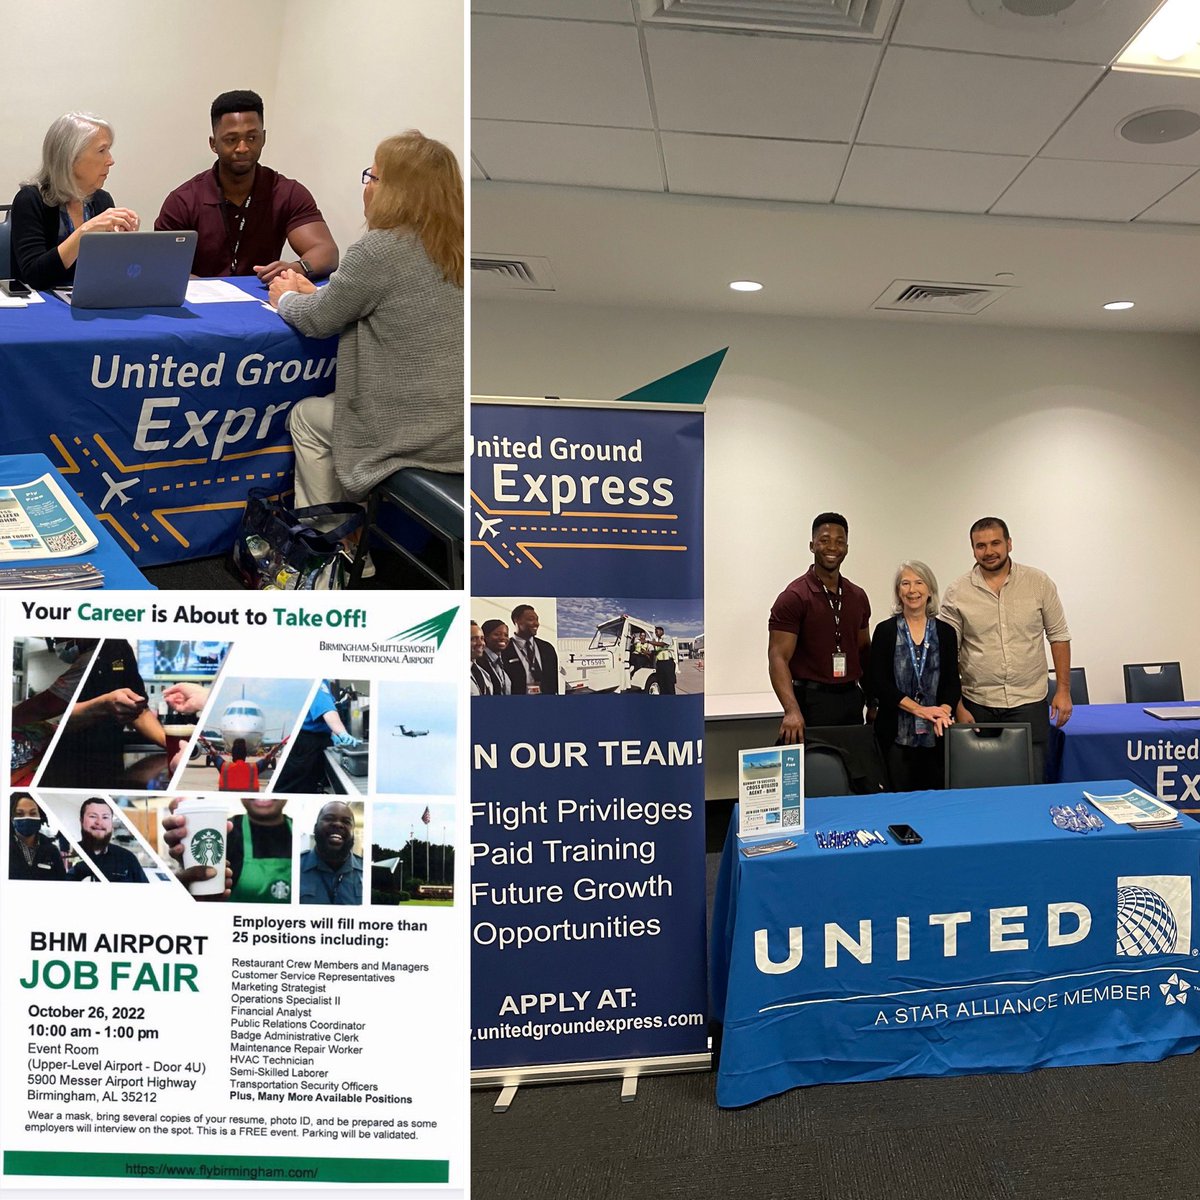 Your career is about to Take OFF ✈️ Join our Recruiting & AO Teams at the BHM Hiring event 💙 Teamwork makes the dreamwork! 🤍 #onthespotoffers #recruitingwithheart #weareUGE